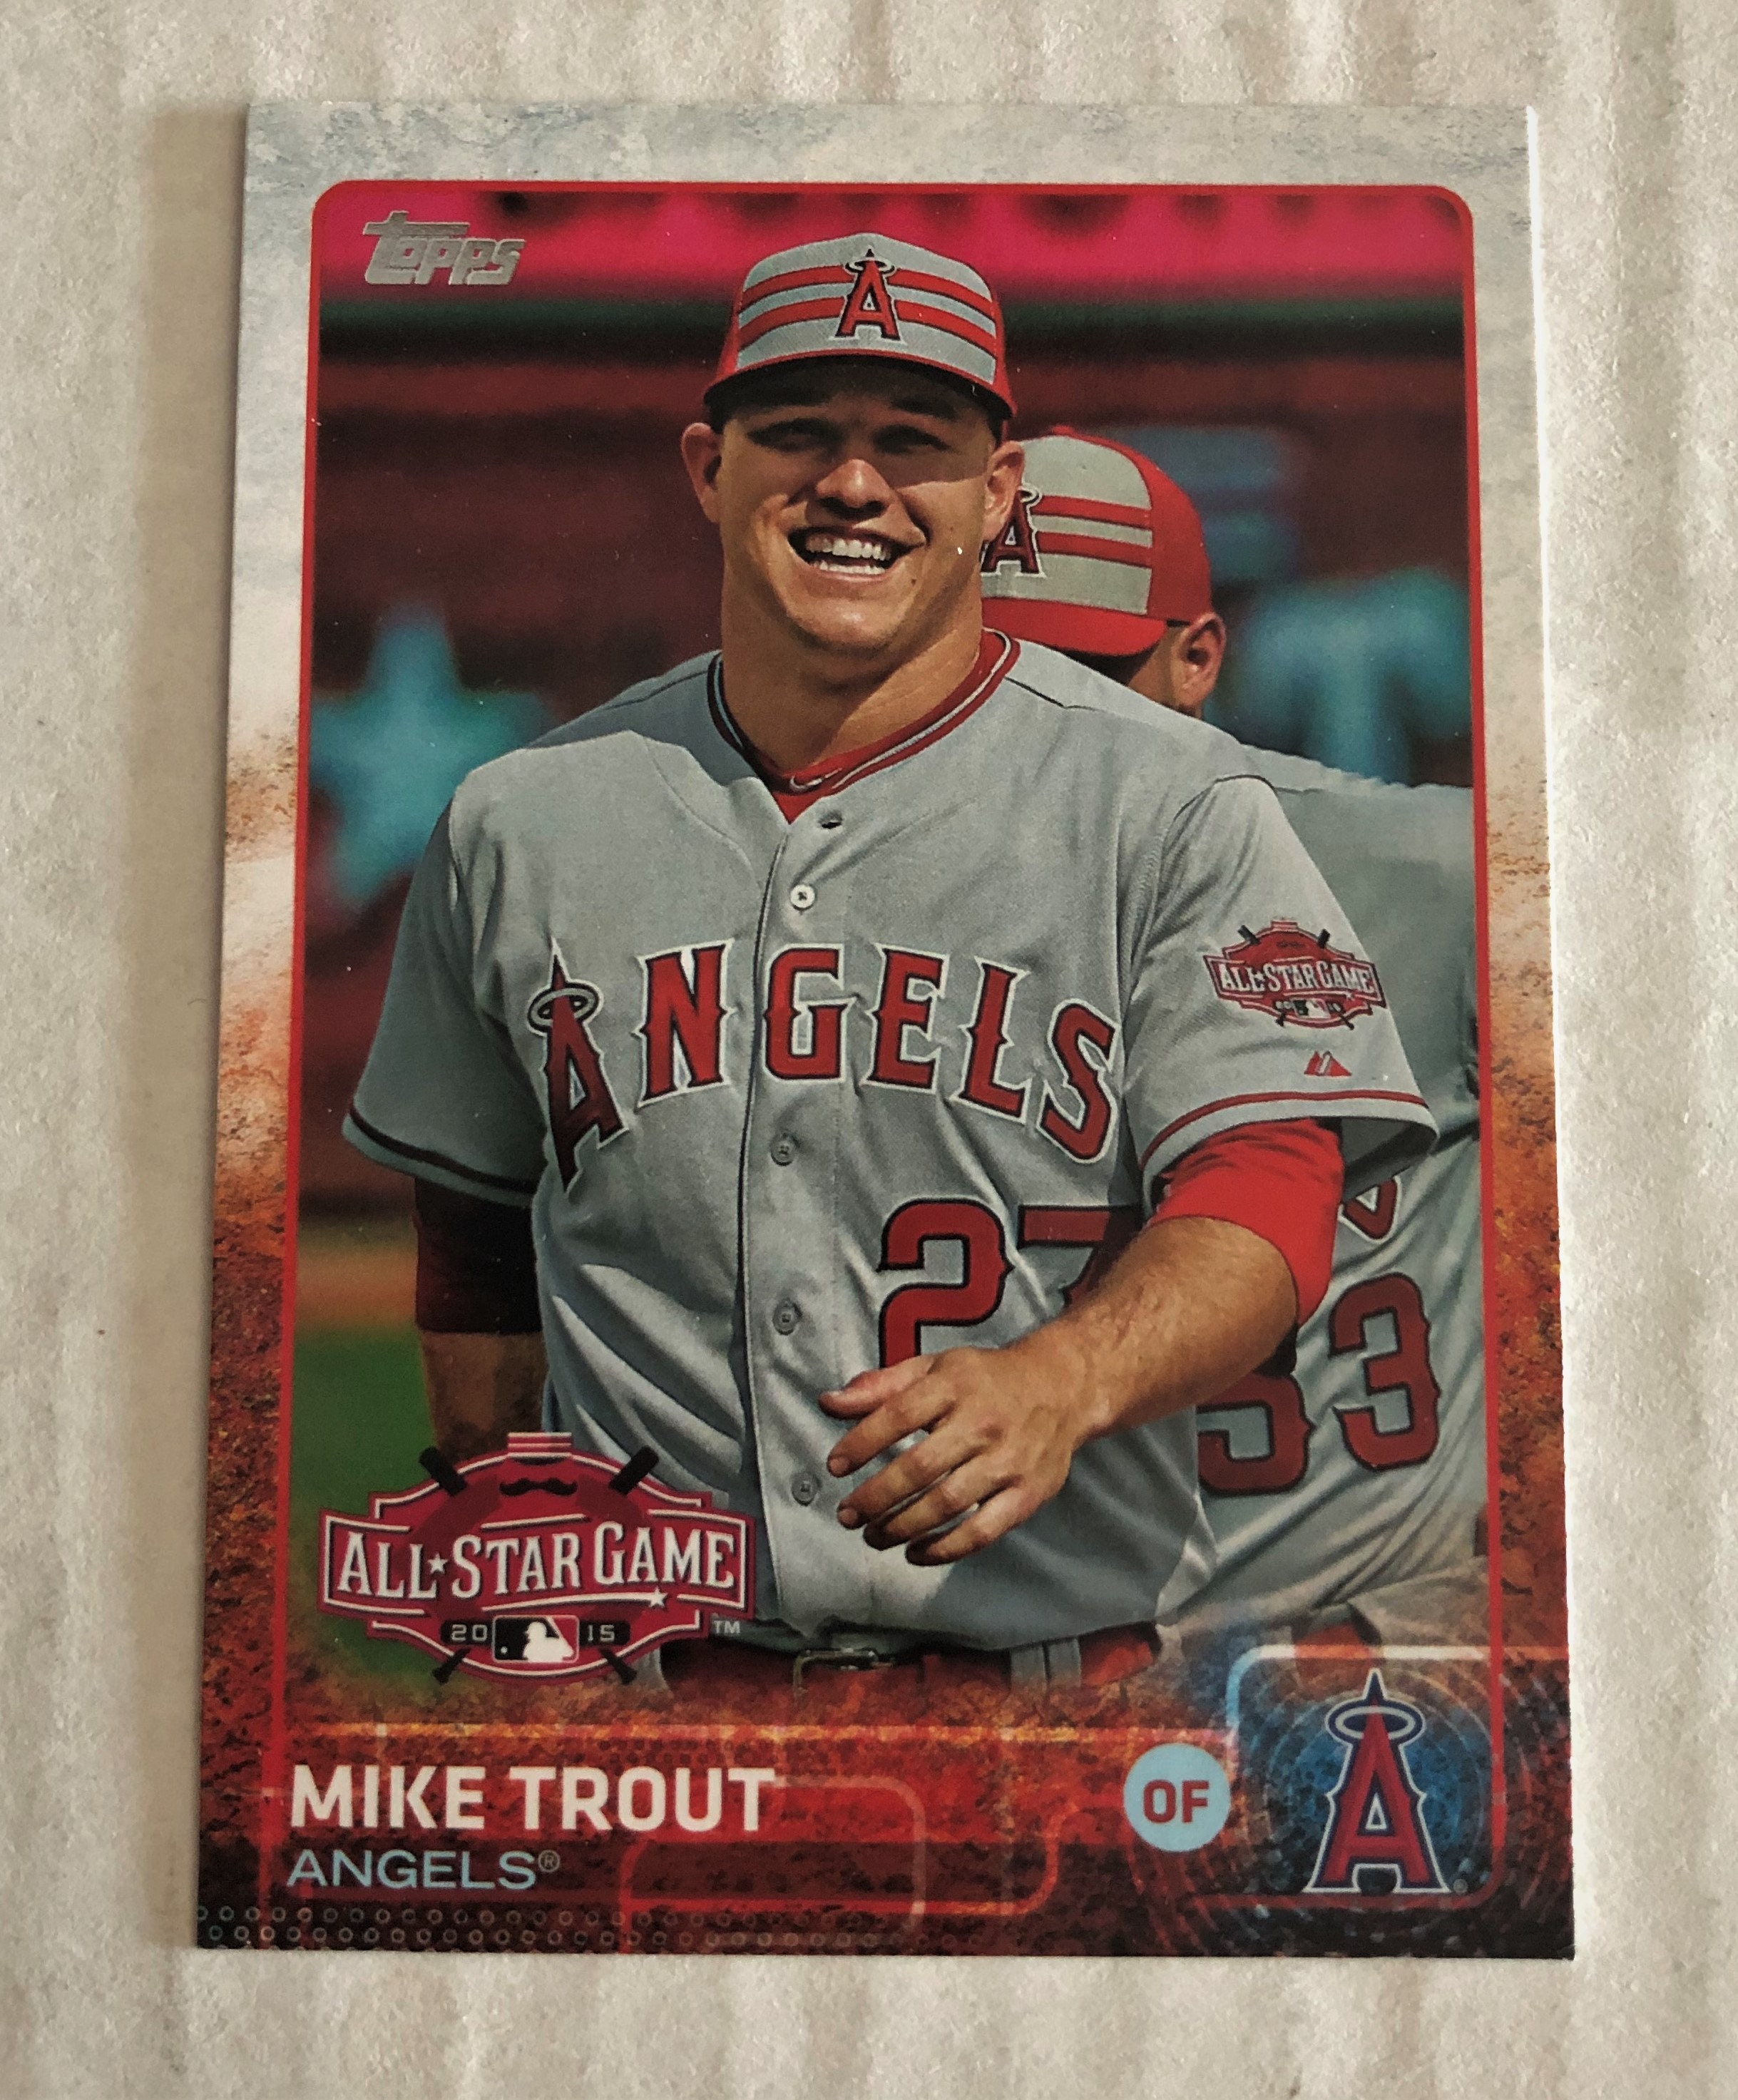 2015 Topps Update All-star Game Mike Trout 